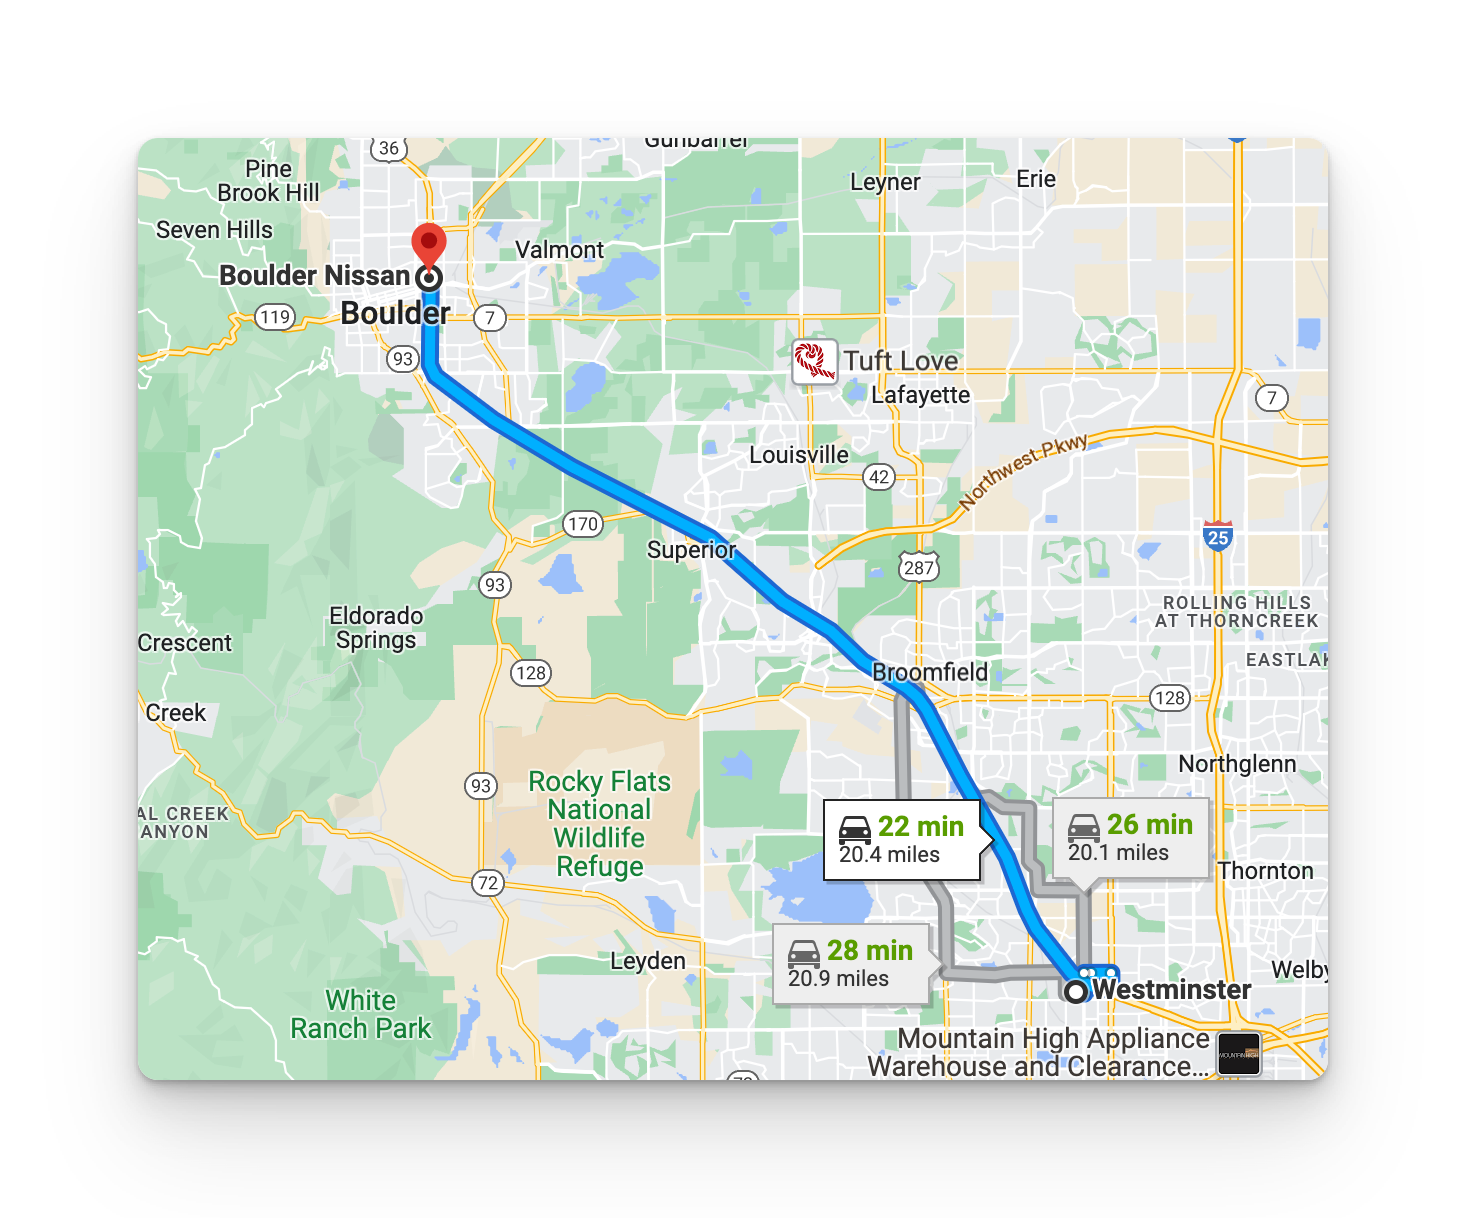 driving directions to boulder from westminster